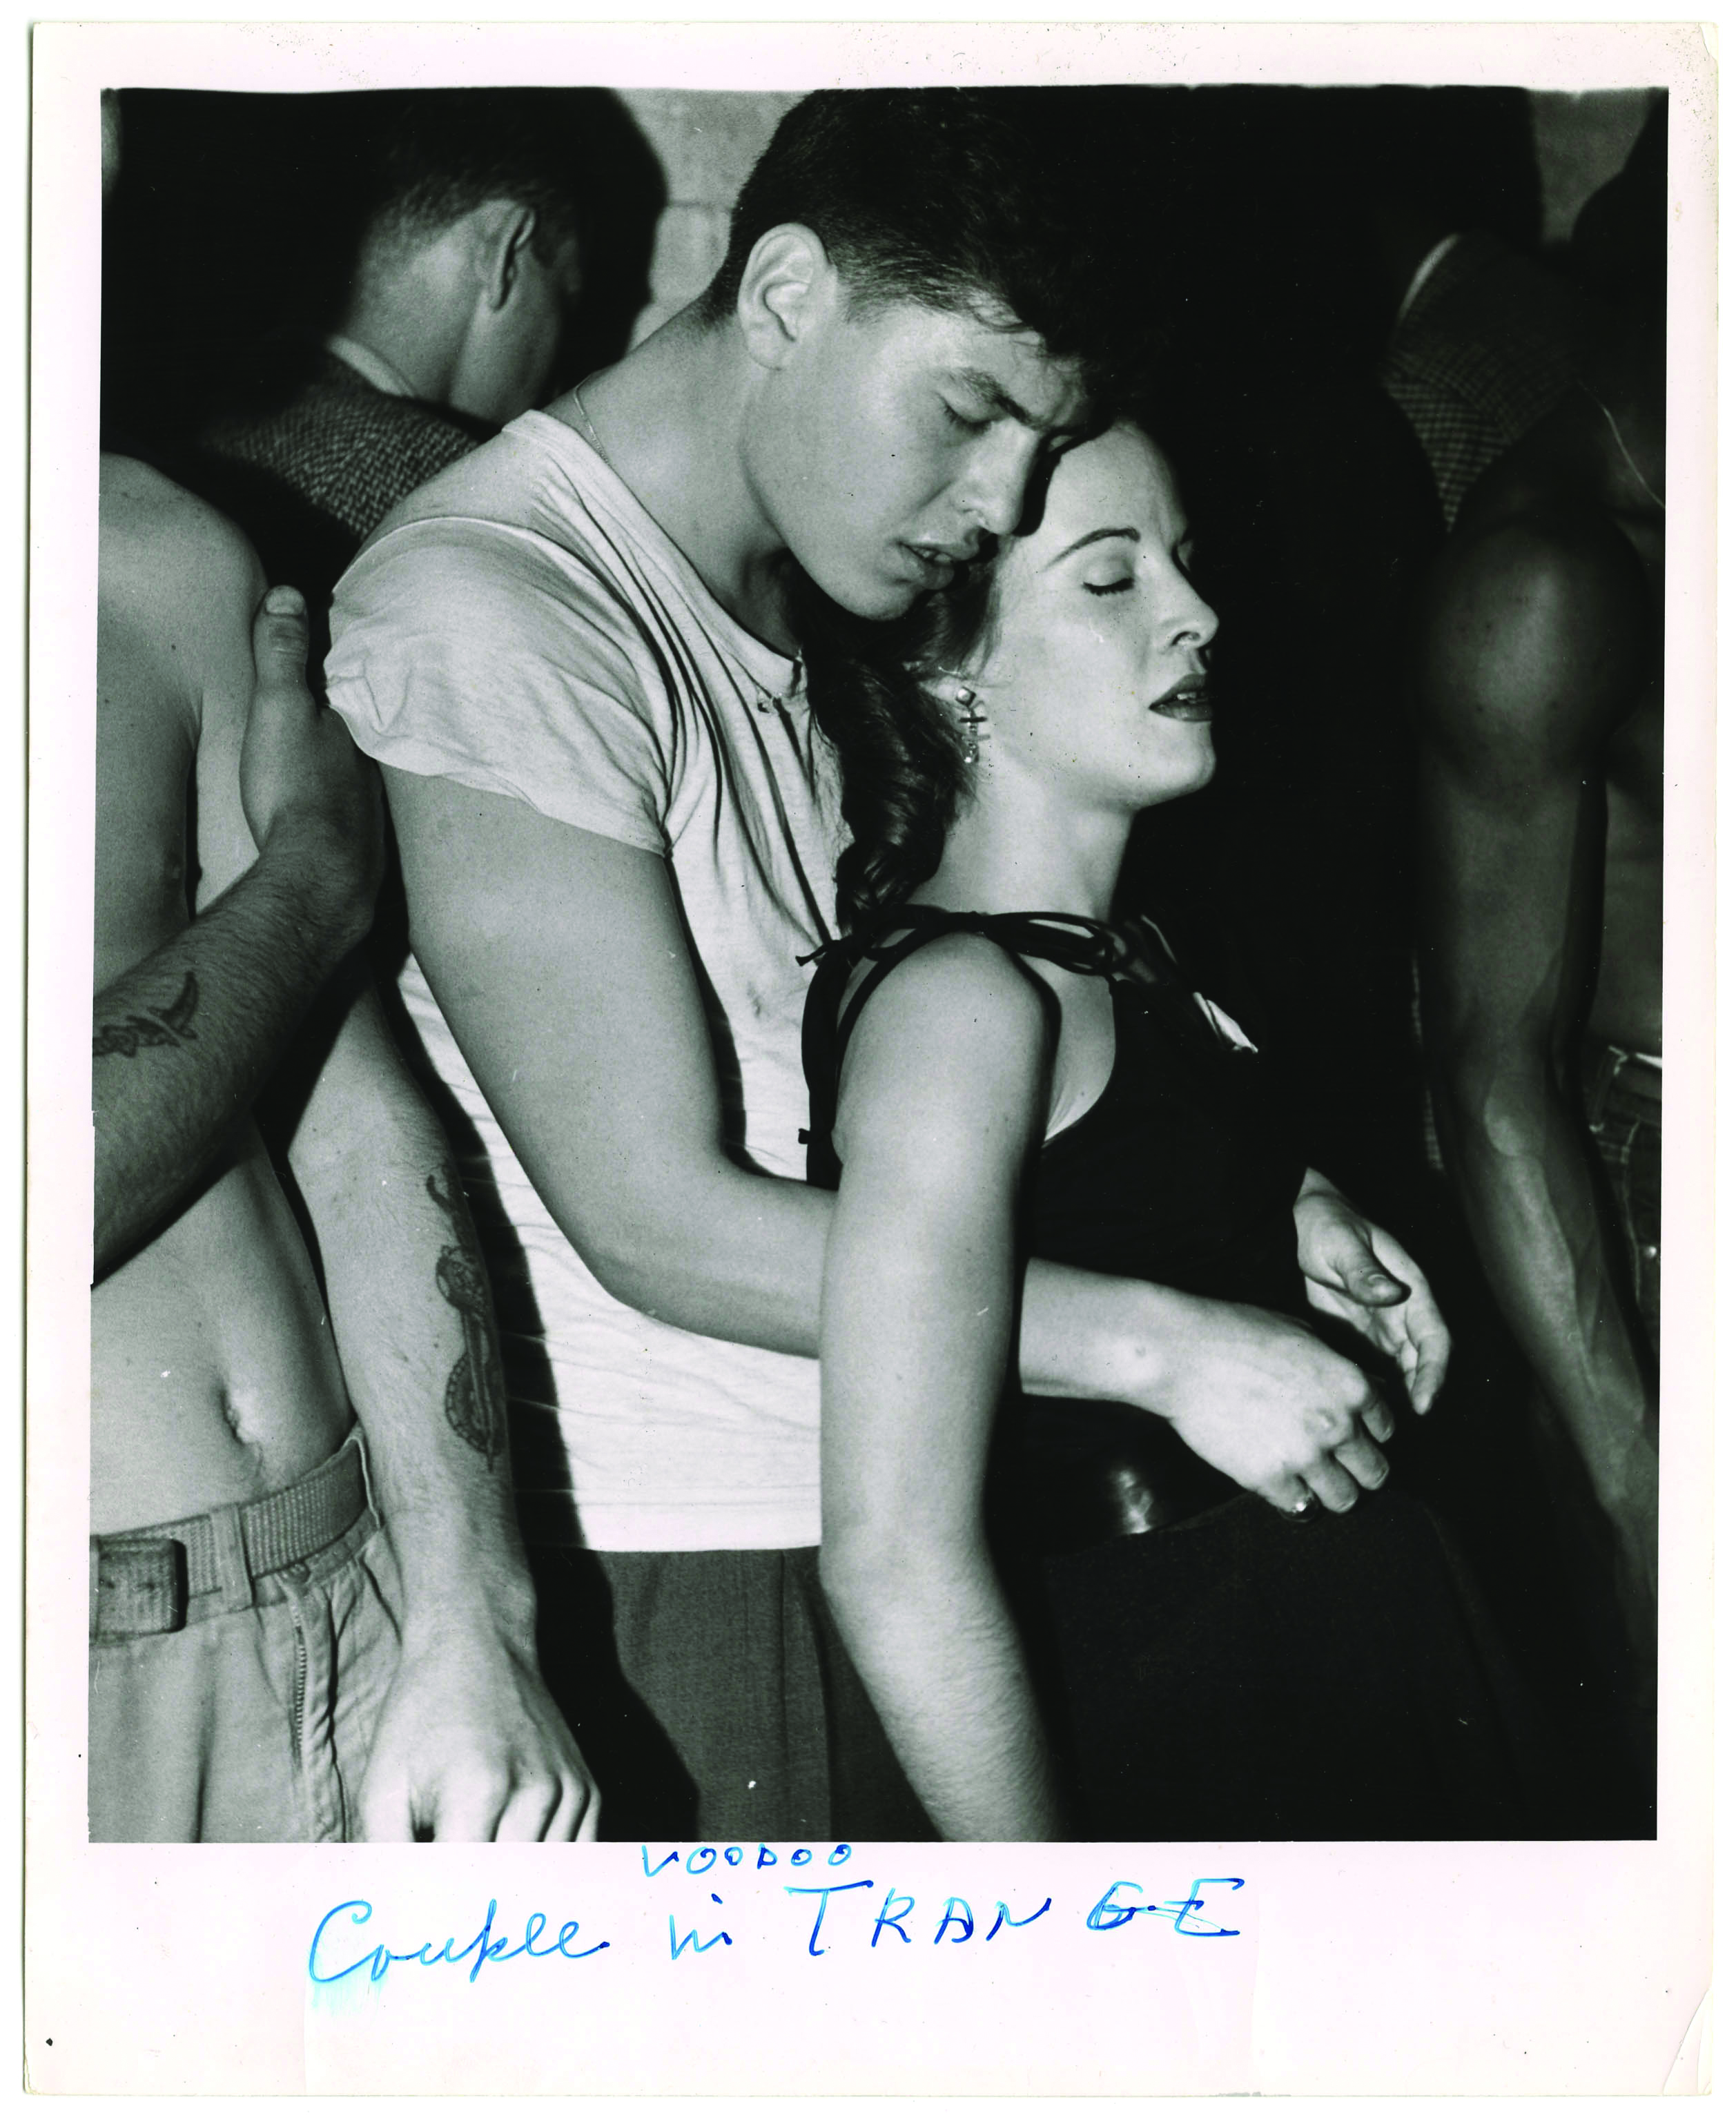 Weegee, Couple in Voodoo Trance, ca. 1956 © Weegee / International Center of Photography 